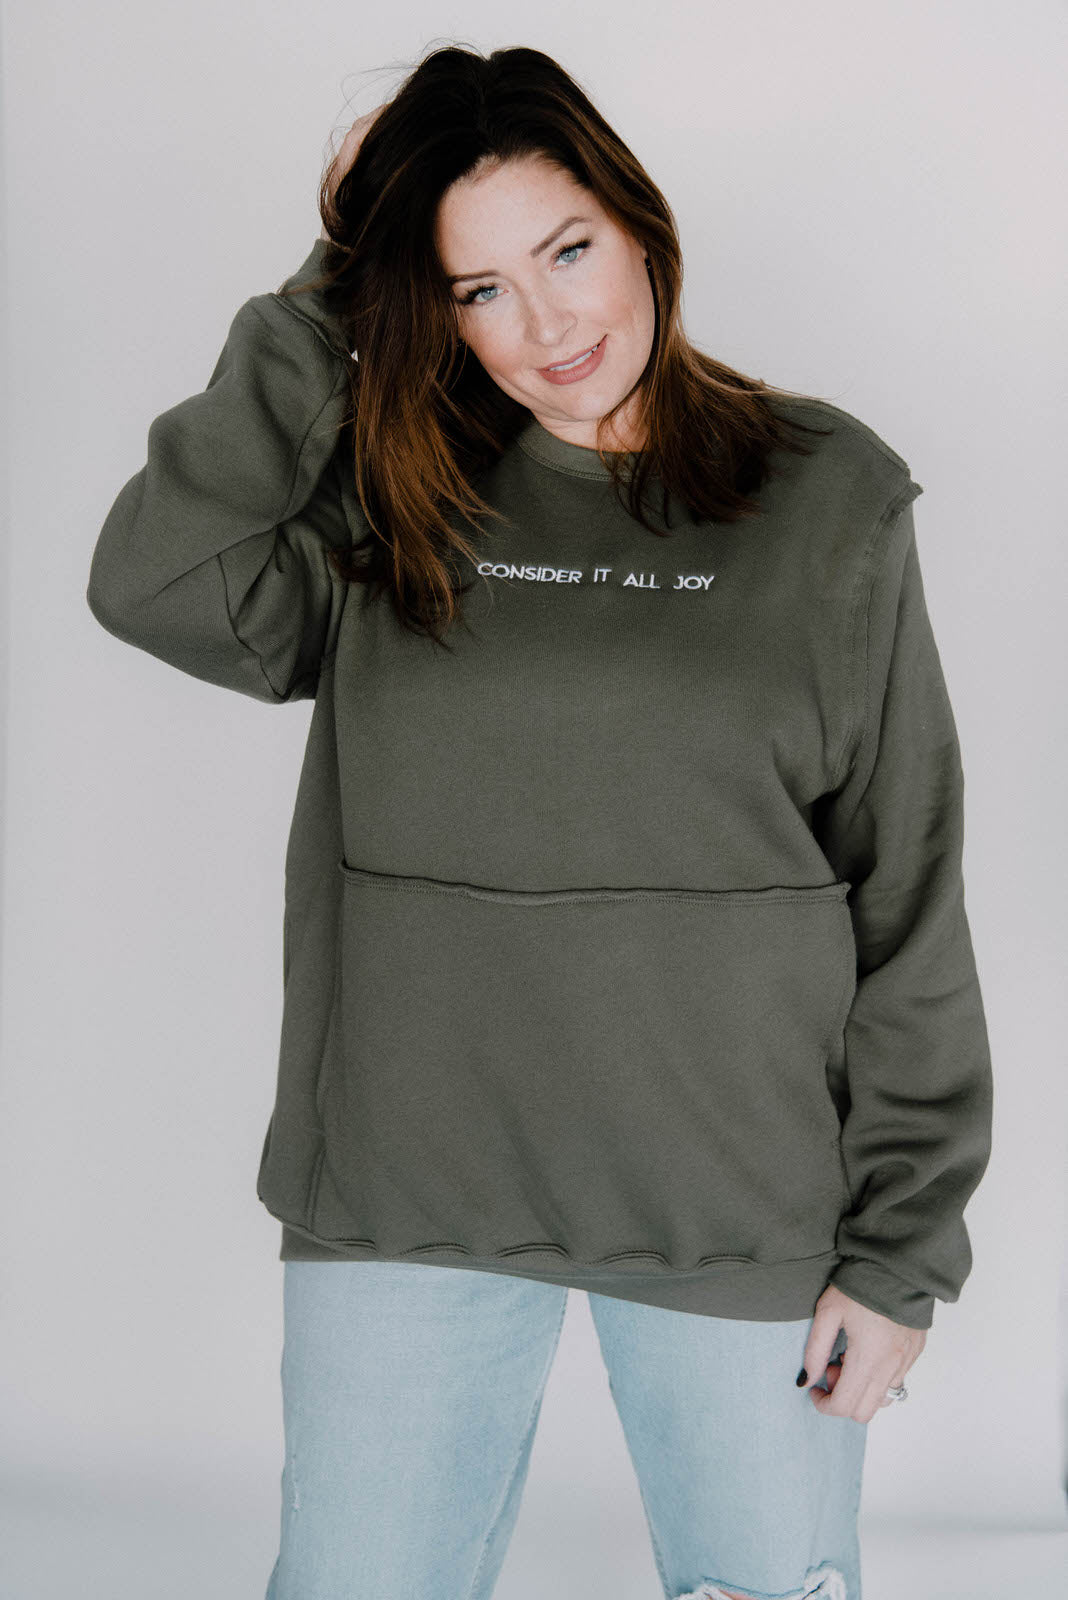 Consider It All Joy Embroidered Sweatshirt - Clothed in Love Boutique